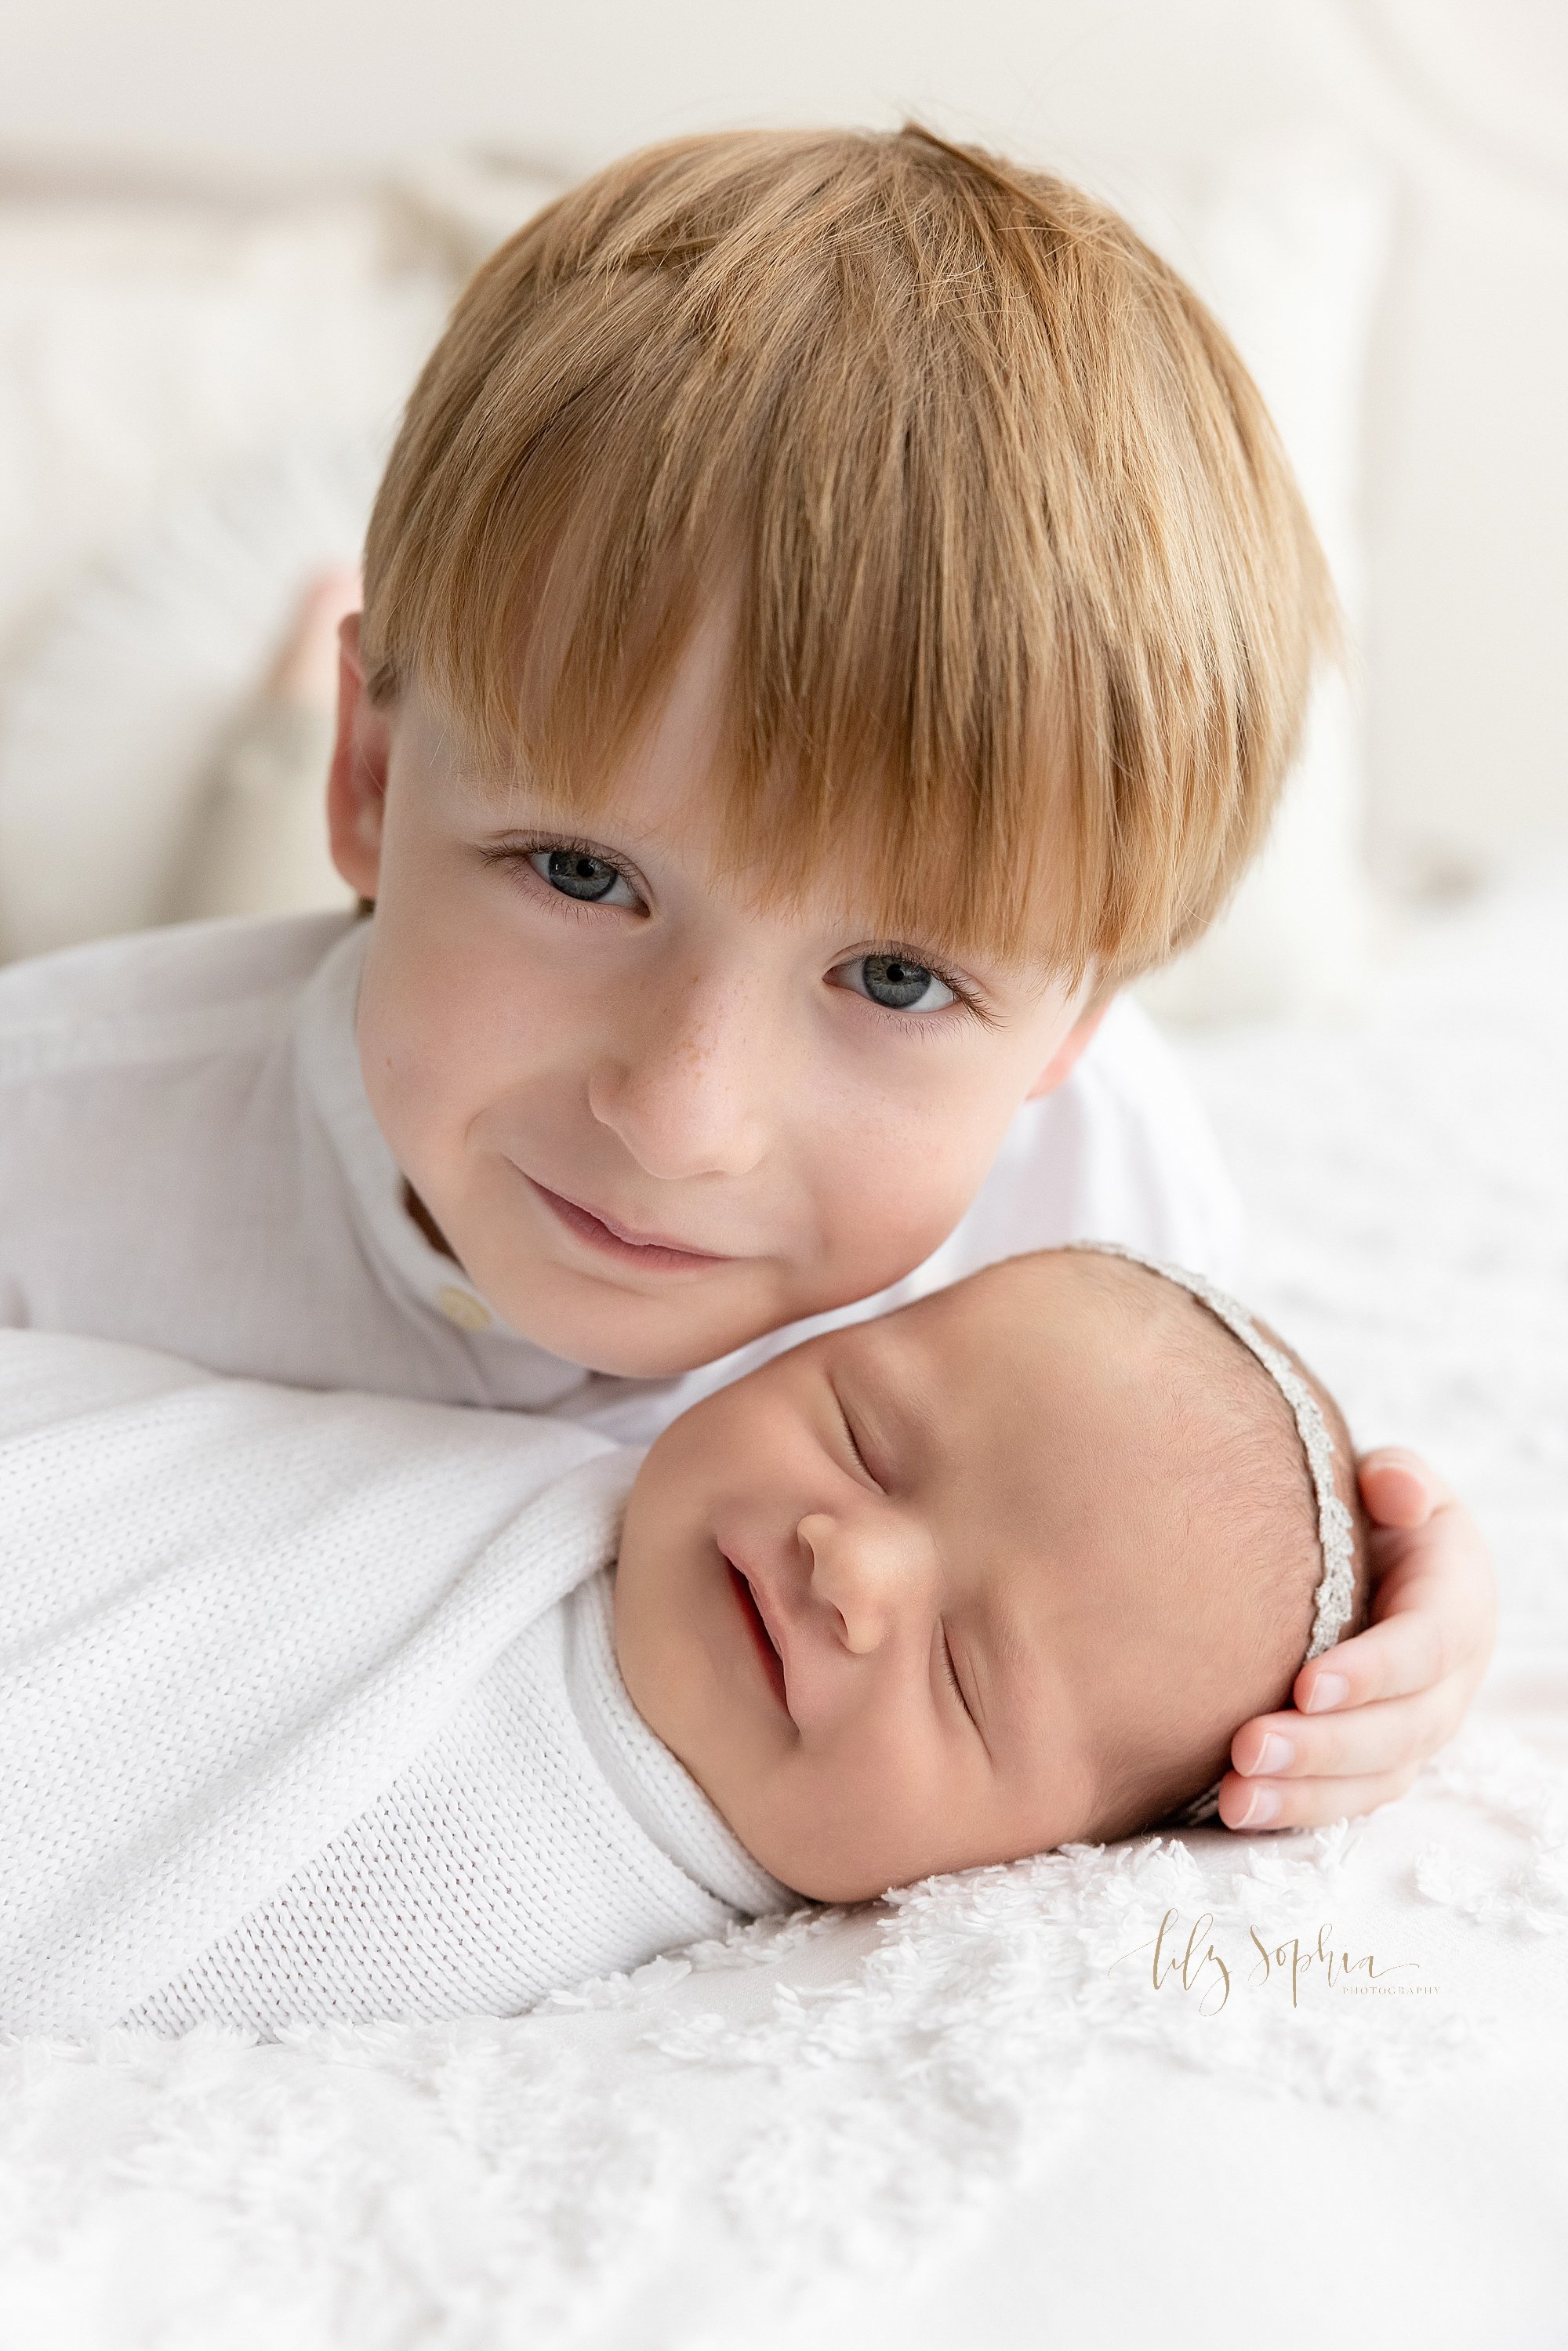  Sibling newborn portrait of a young boy lying on his stomach on a bed with his sleeping newborn baby sister in front of him as they both smile while the boy places his hand on her head taken using natural light in a photography studio in Ponce City 